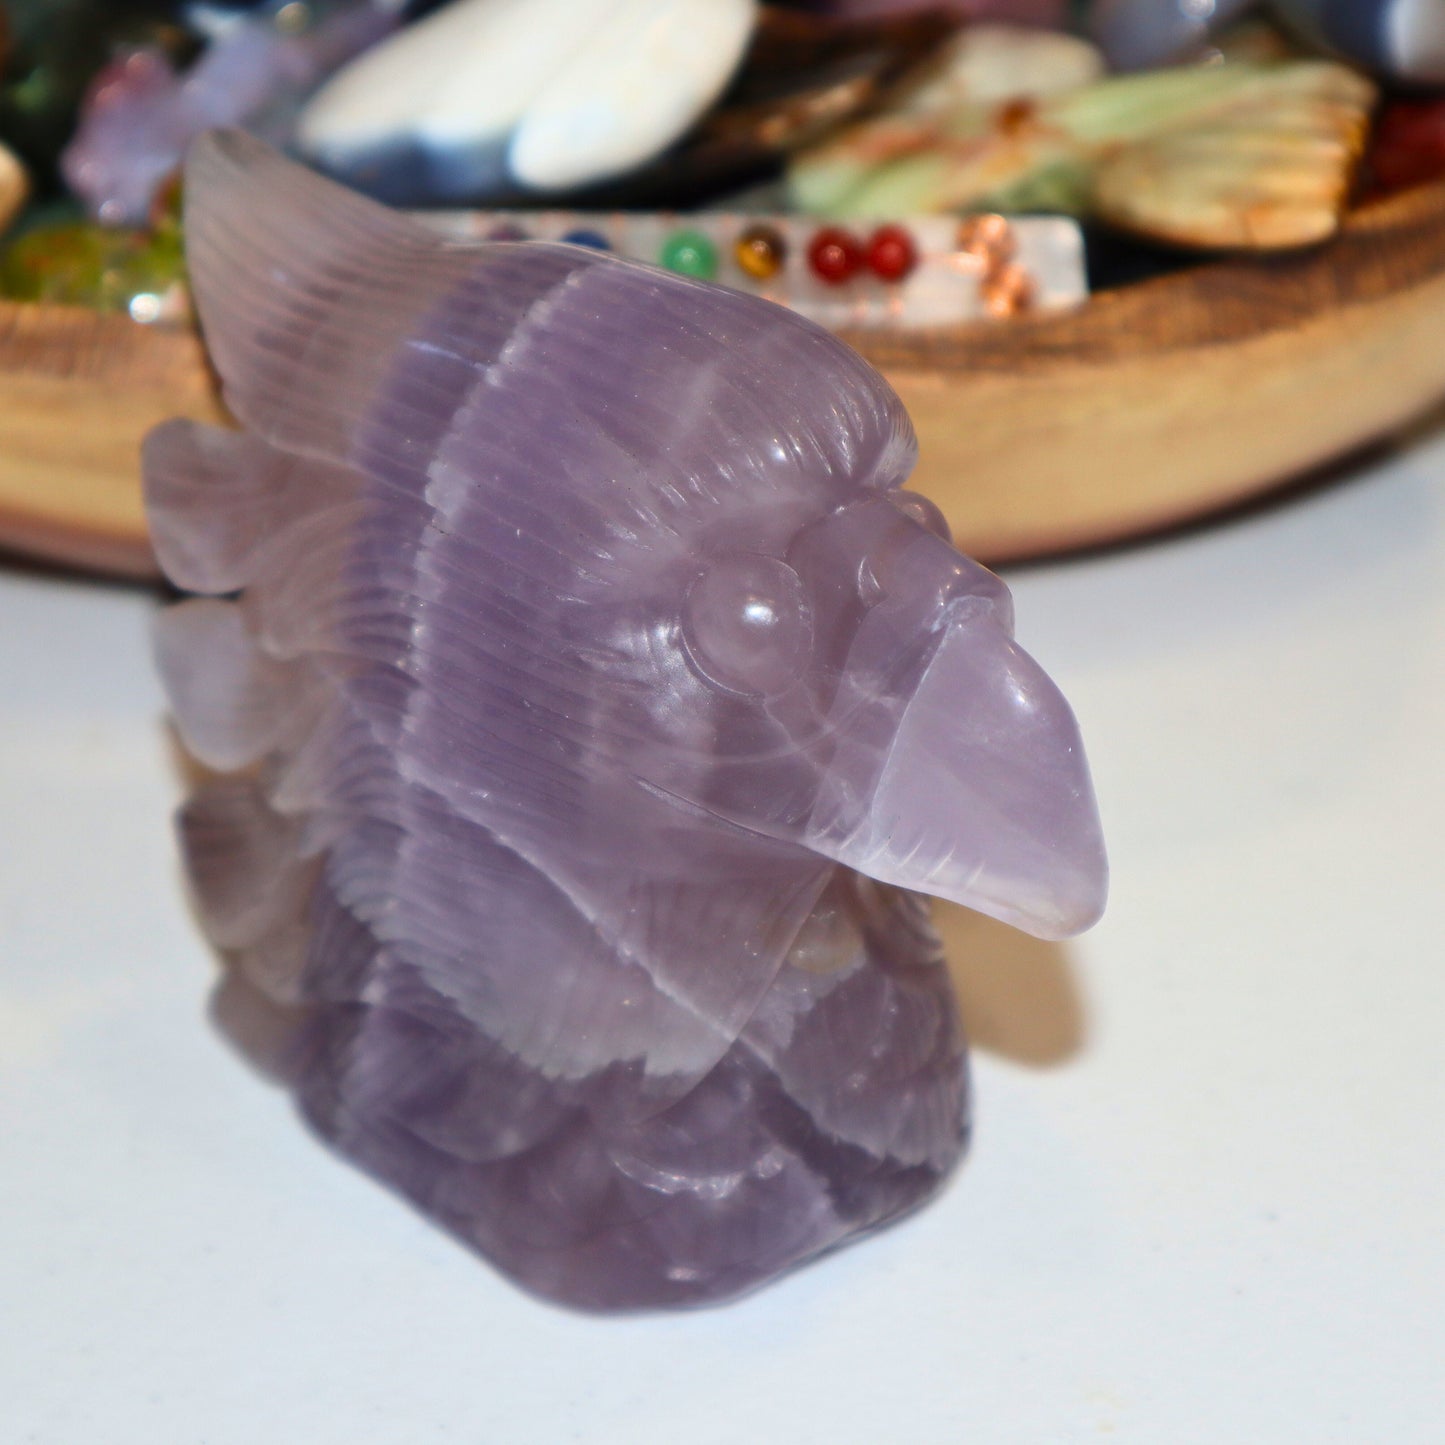 Purple Fluorite Eagle Head Carving - Unique Gemstone Sculpture, Healing Crystal Art, Home Decor, Gift for Nature Lovers, Handcrafted on Etsy